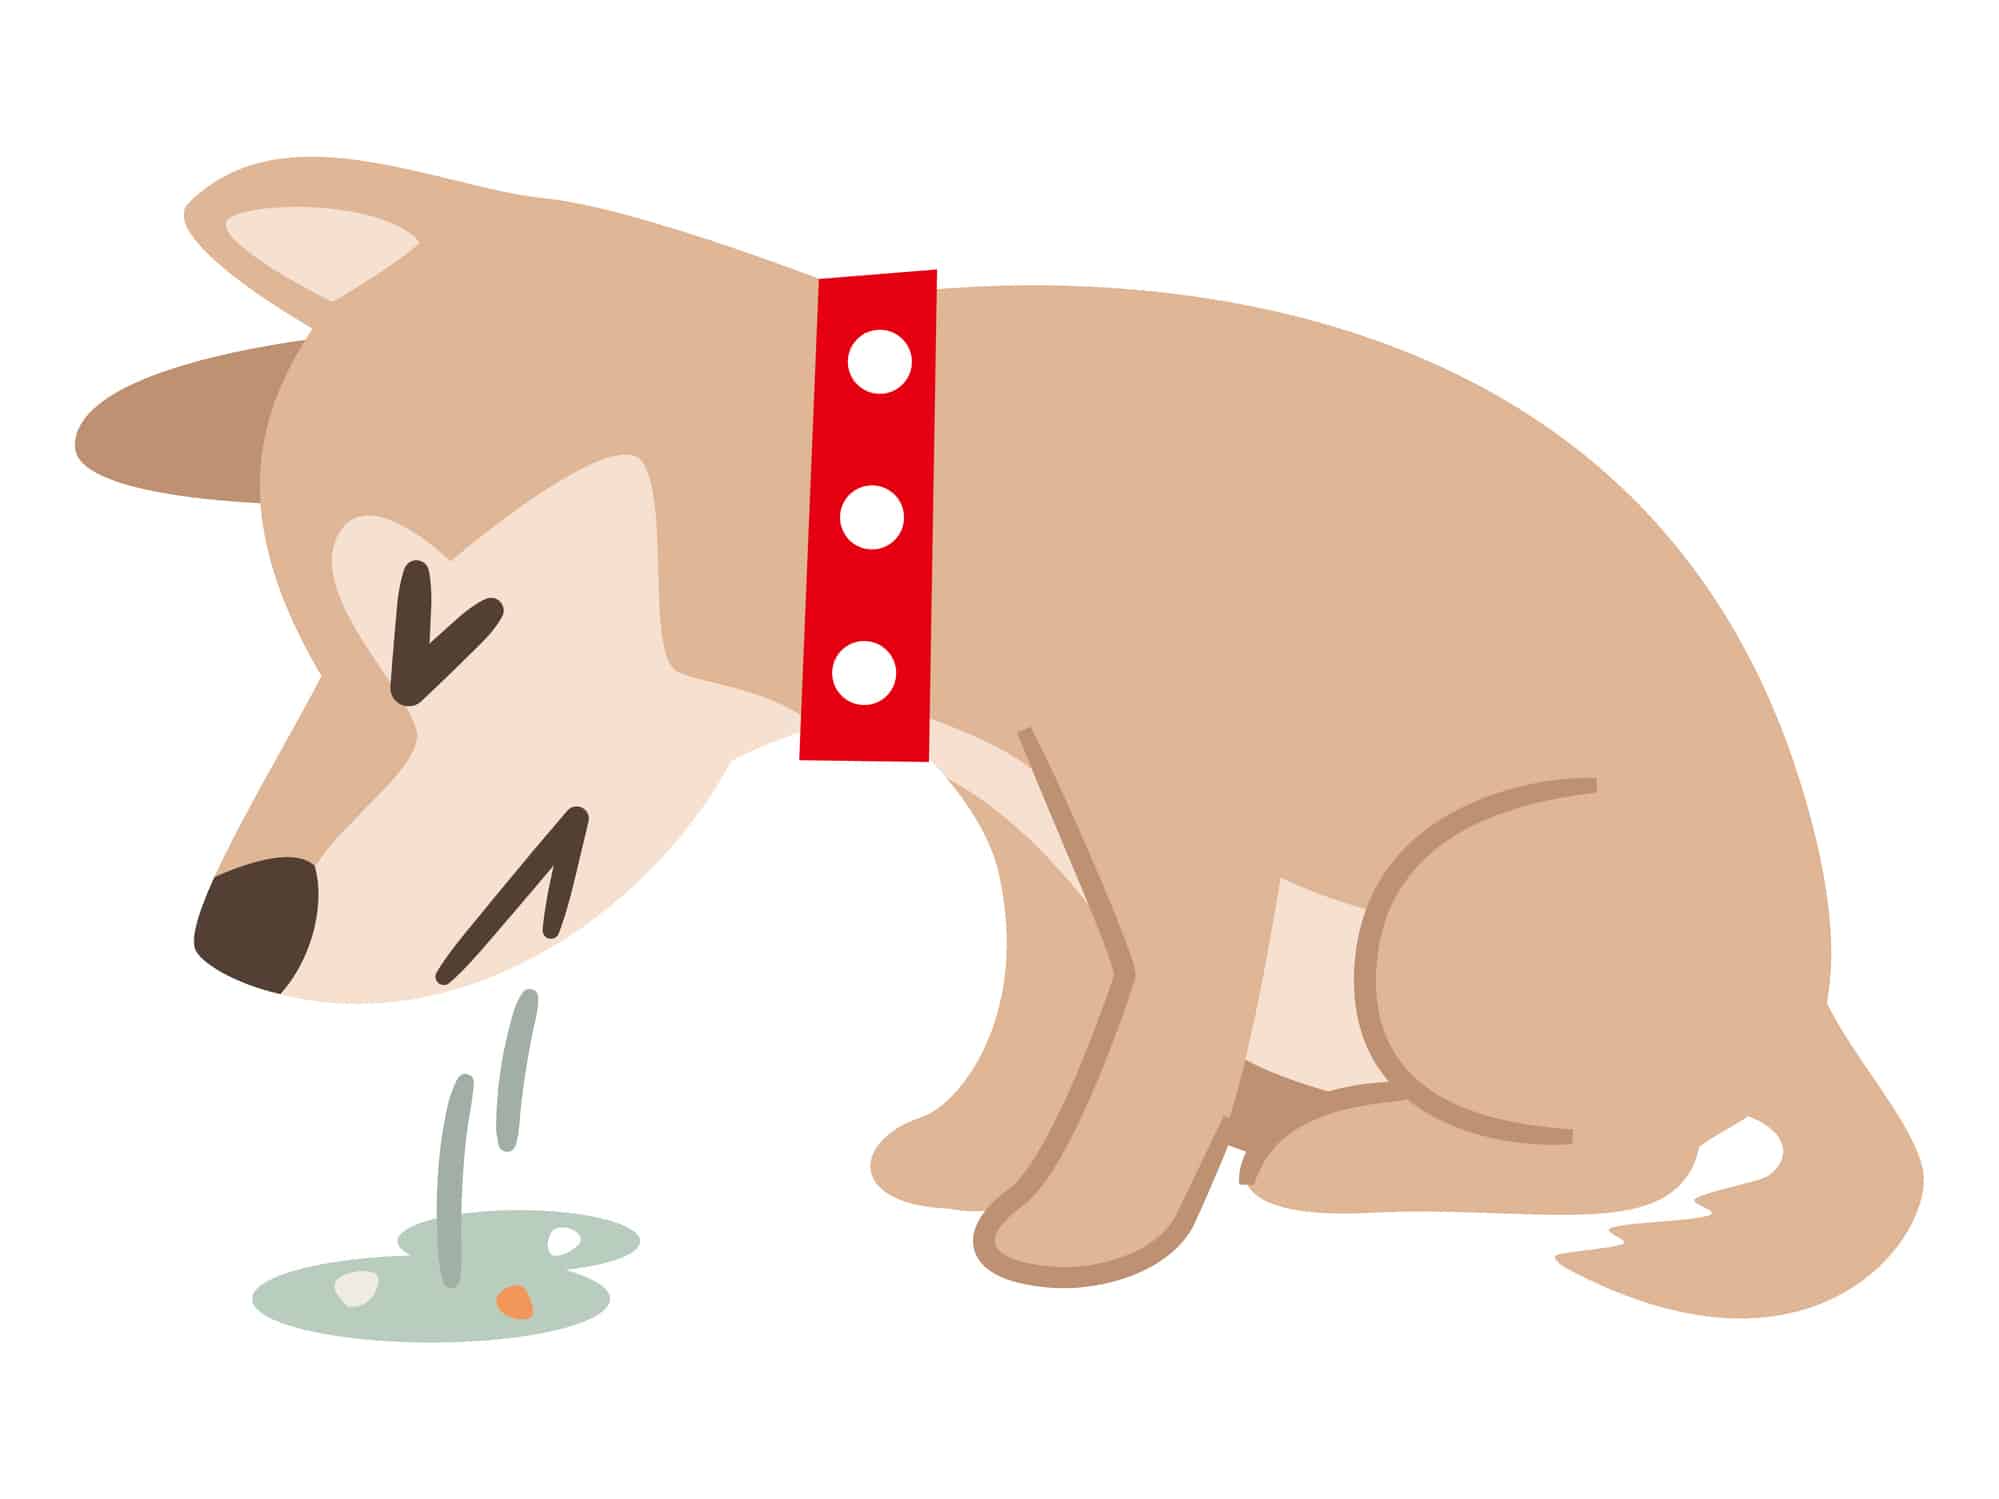 Illustration of a dog vomiting on a white background